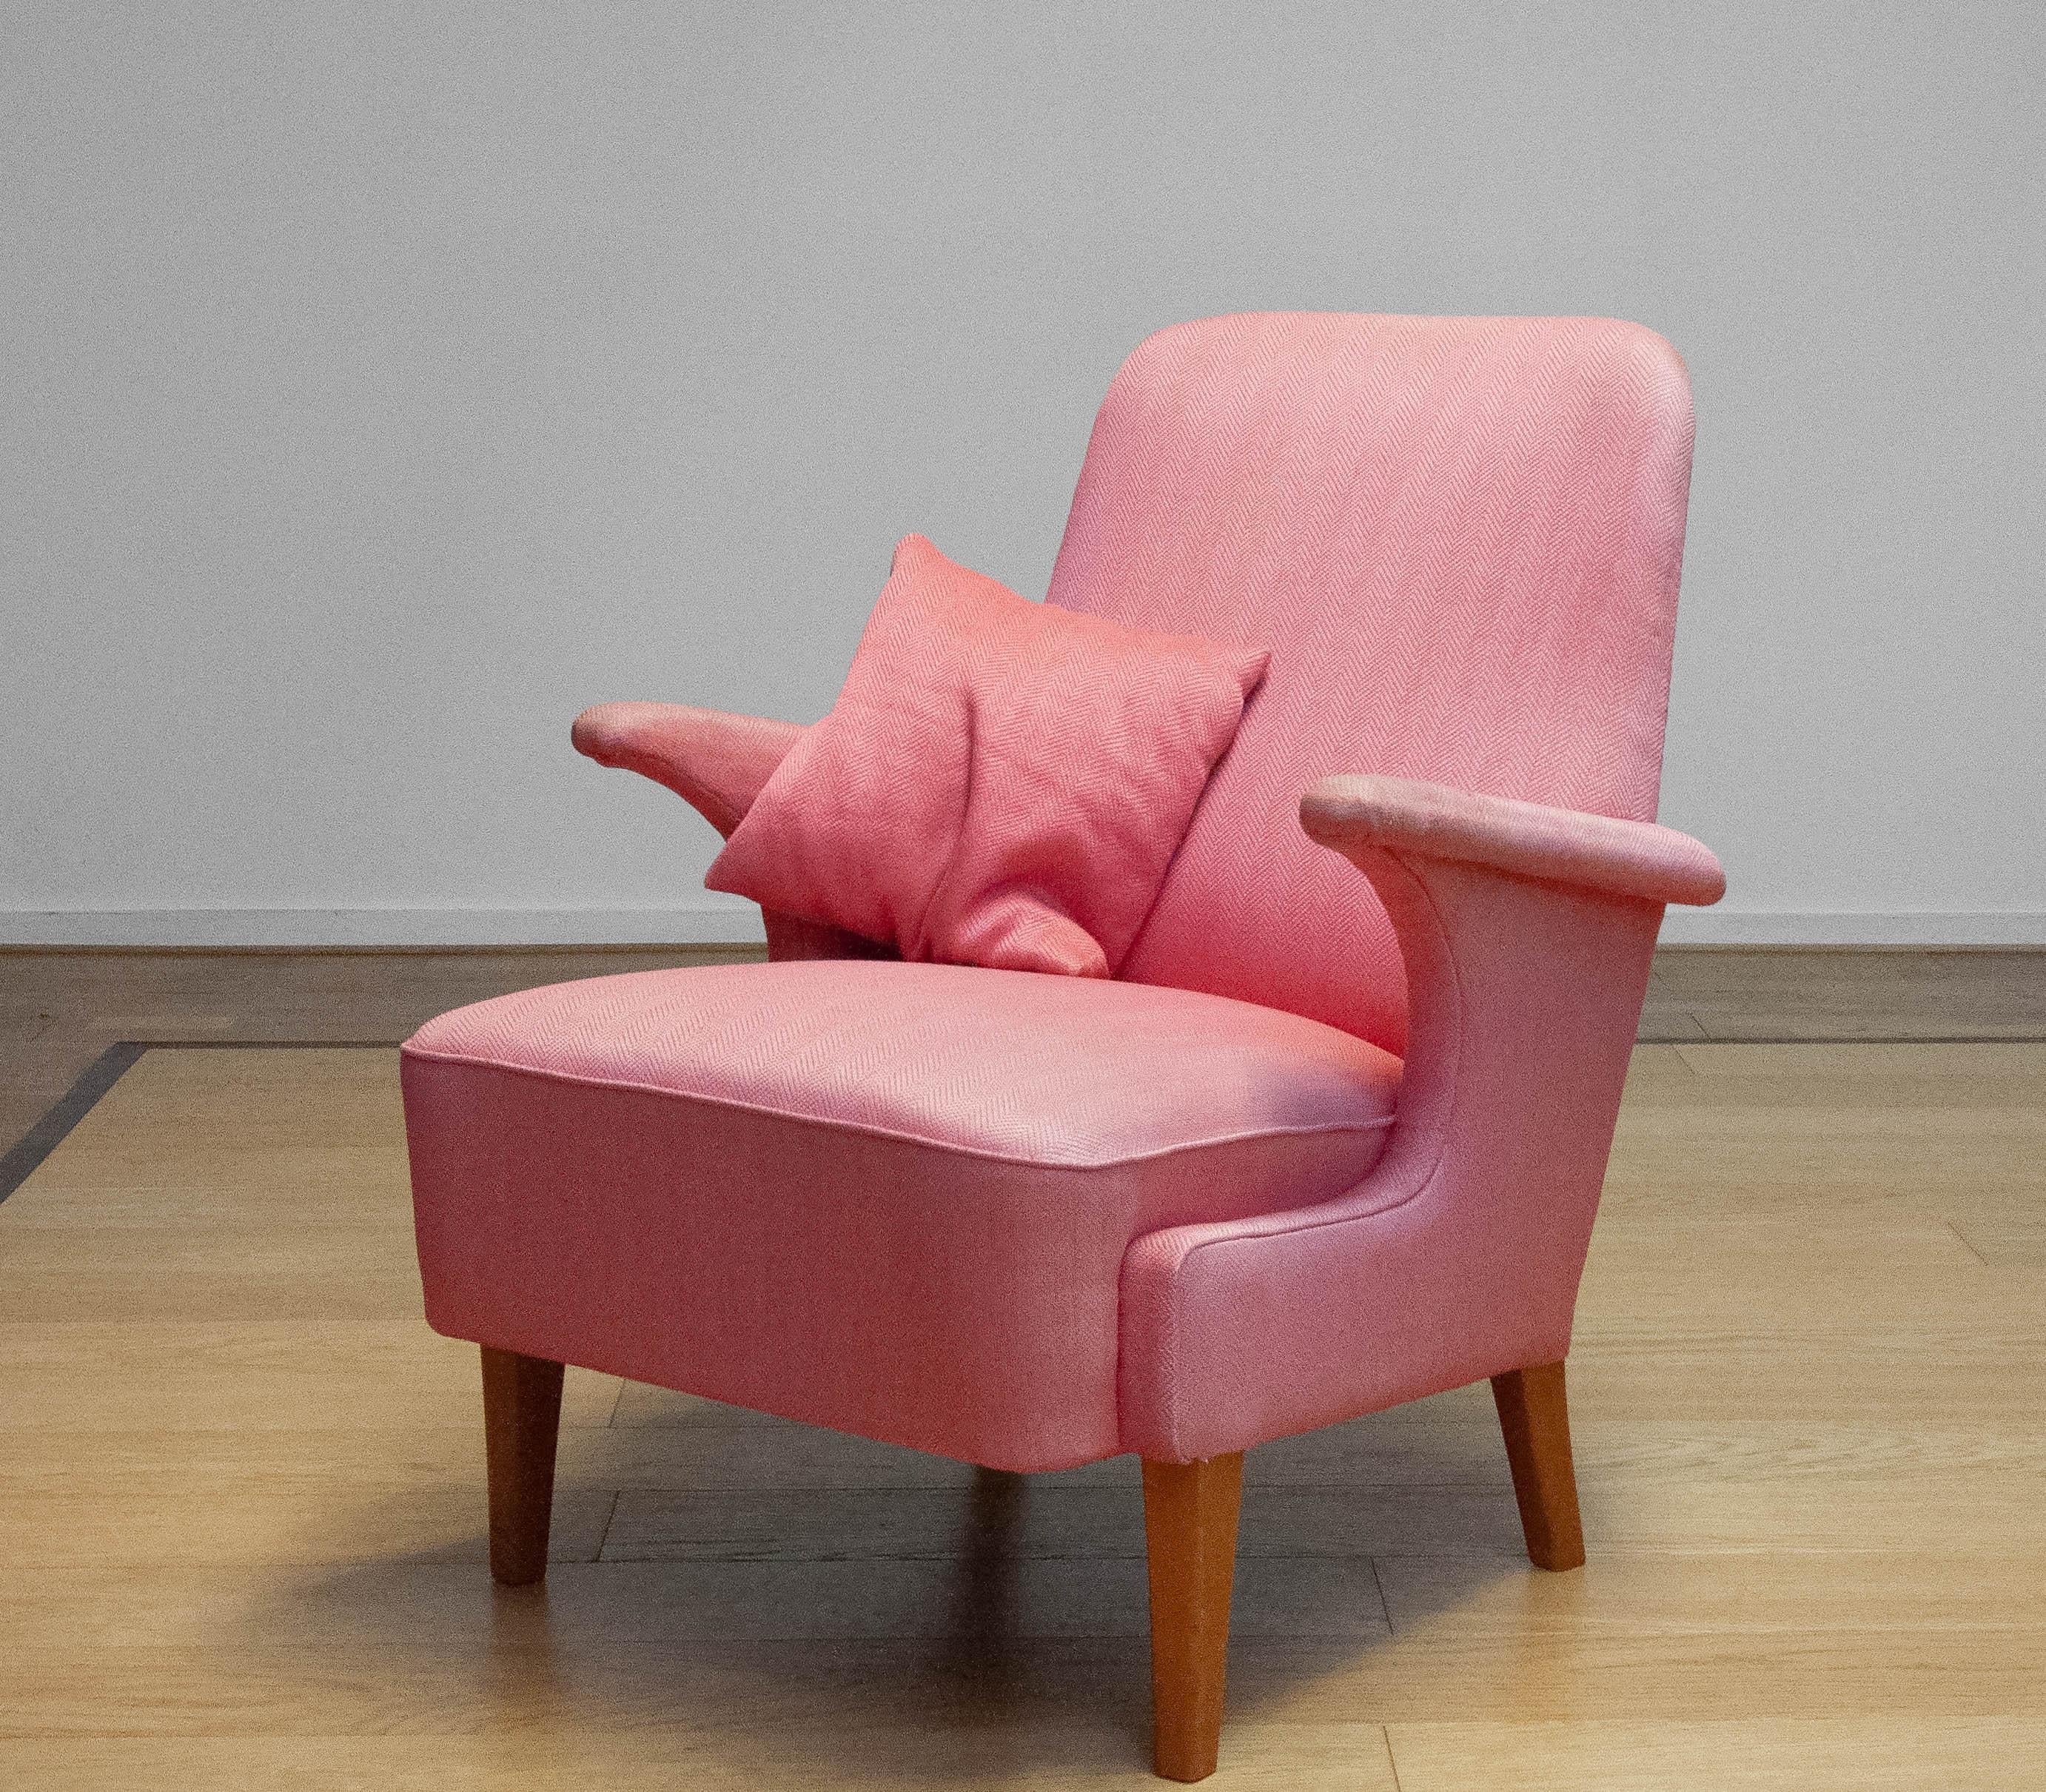 1950 Armchair / Lounge Chair With Powder Pink Wool Upholstery By Dux From Sweden For Sale 7